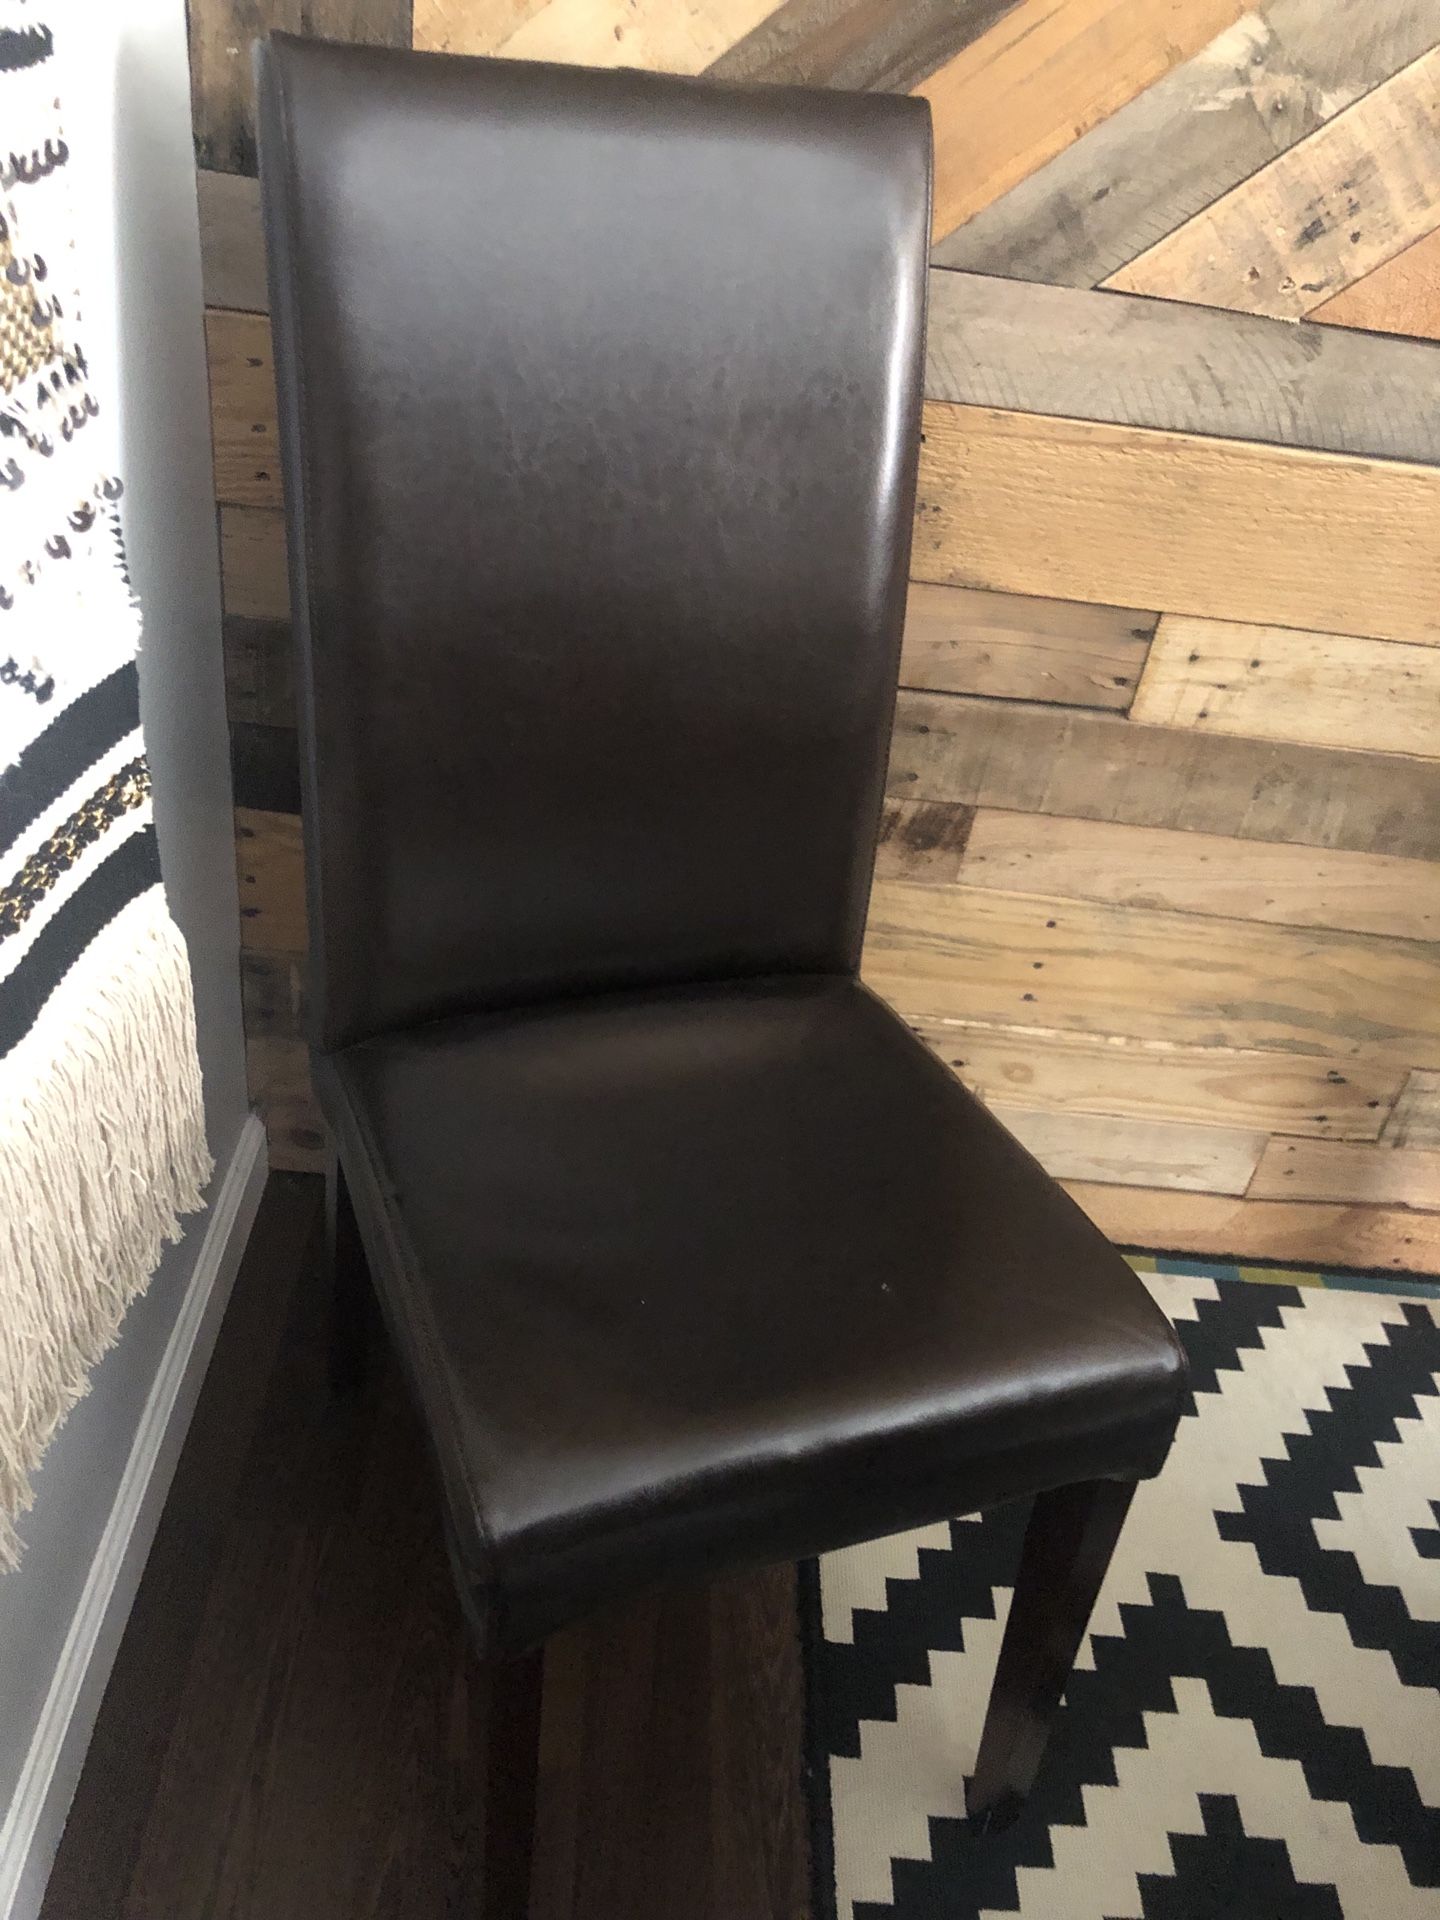 Leather side chair